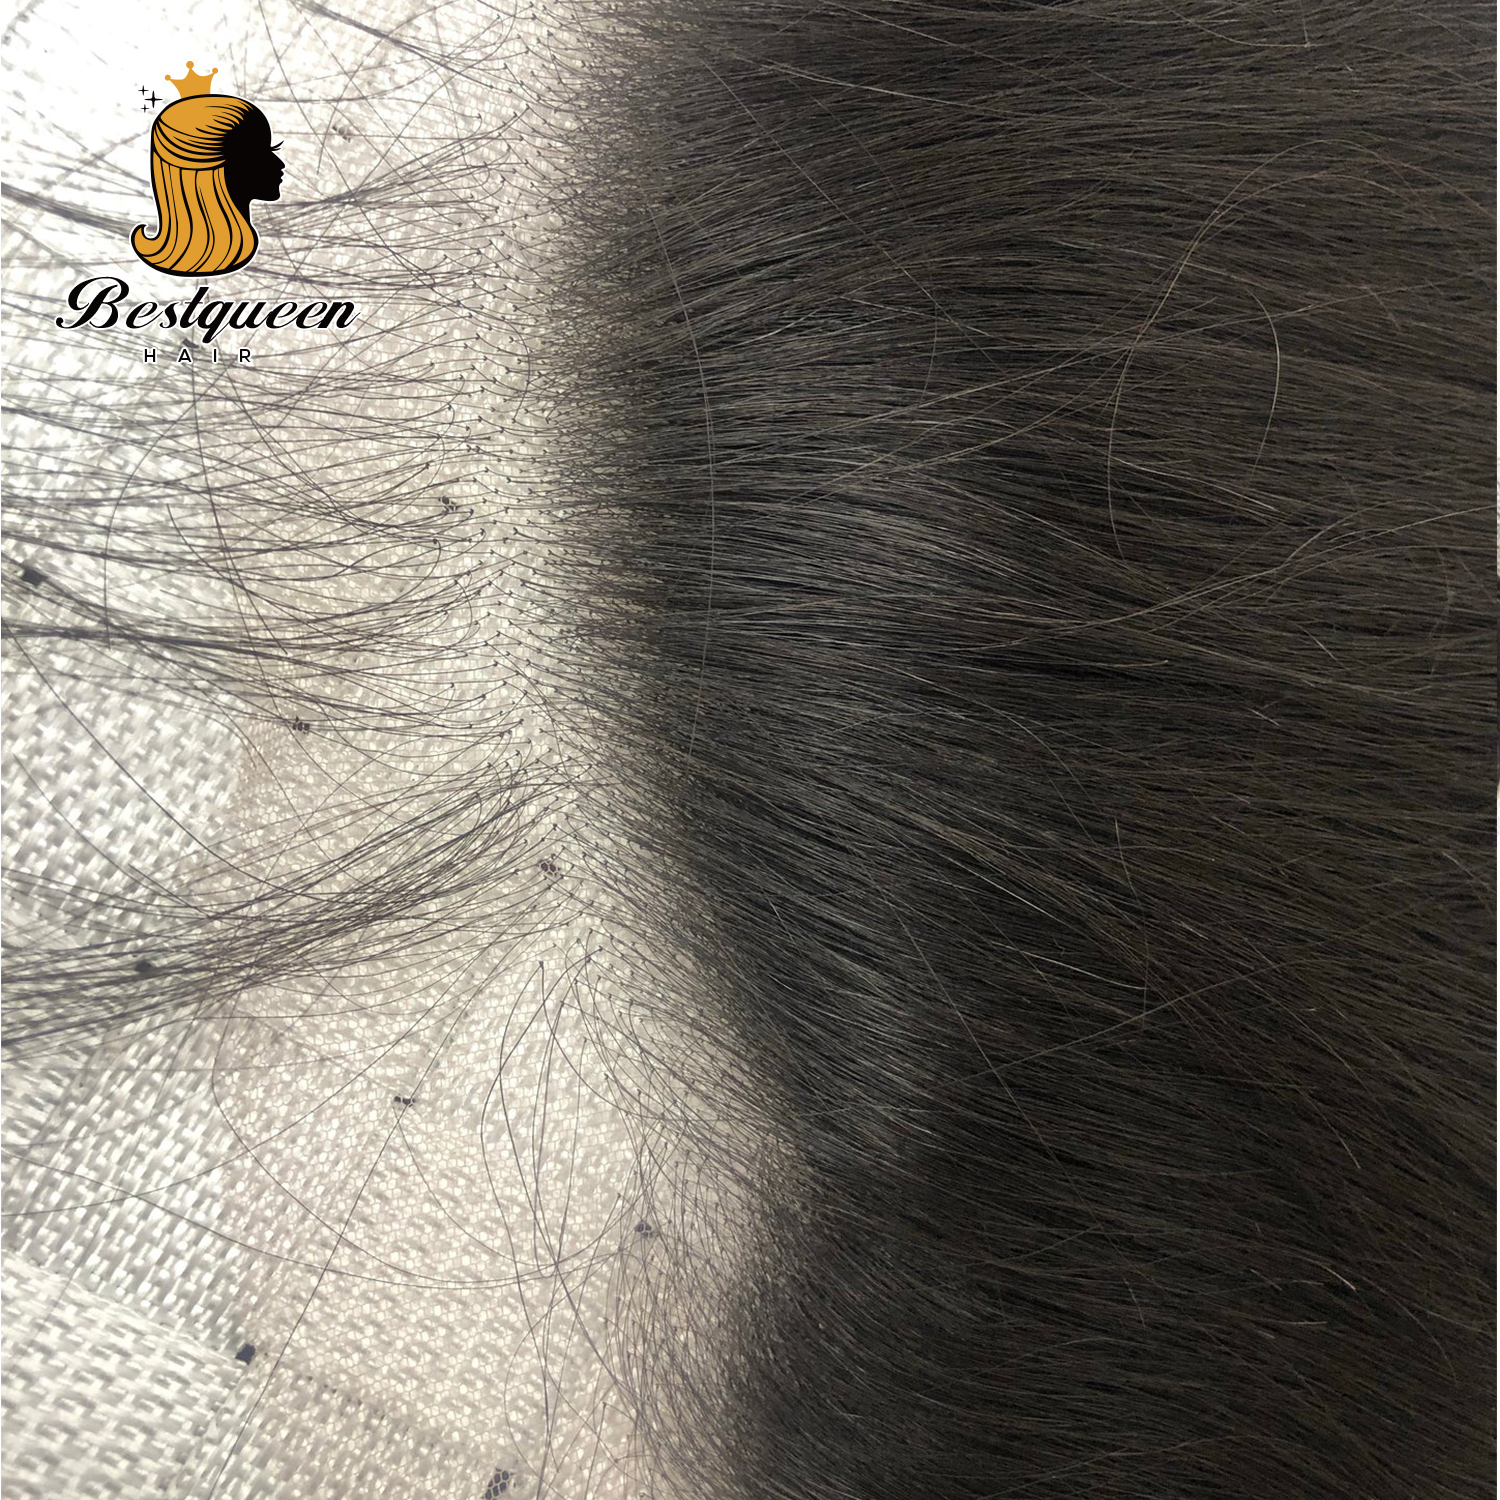 BestqueenHair Lace Frontal 13*4 or 13*6 Illusion Lace  Straight ,Invisible Lace Raw Unprocessed Hd Frontal  